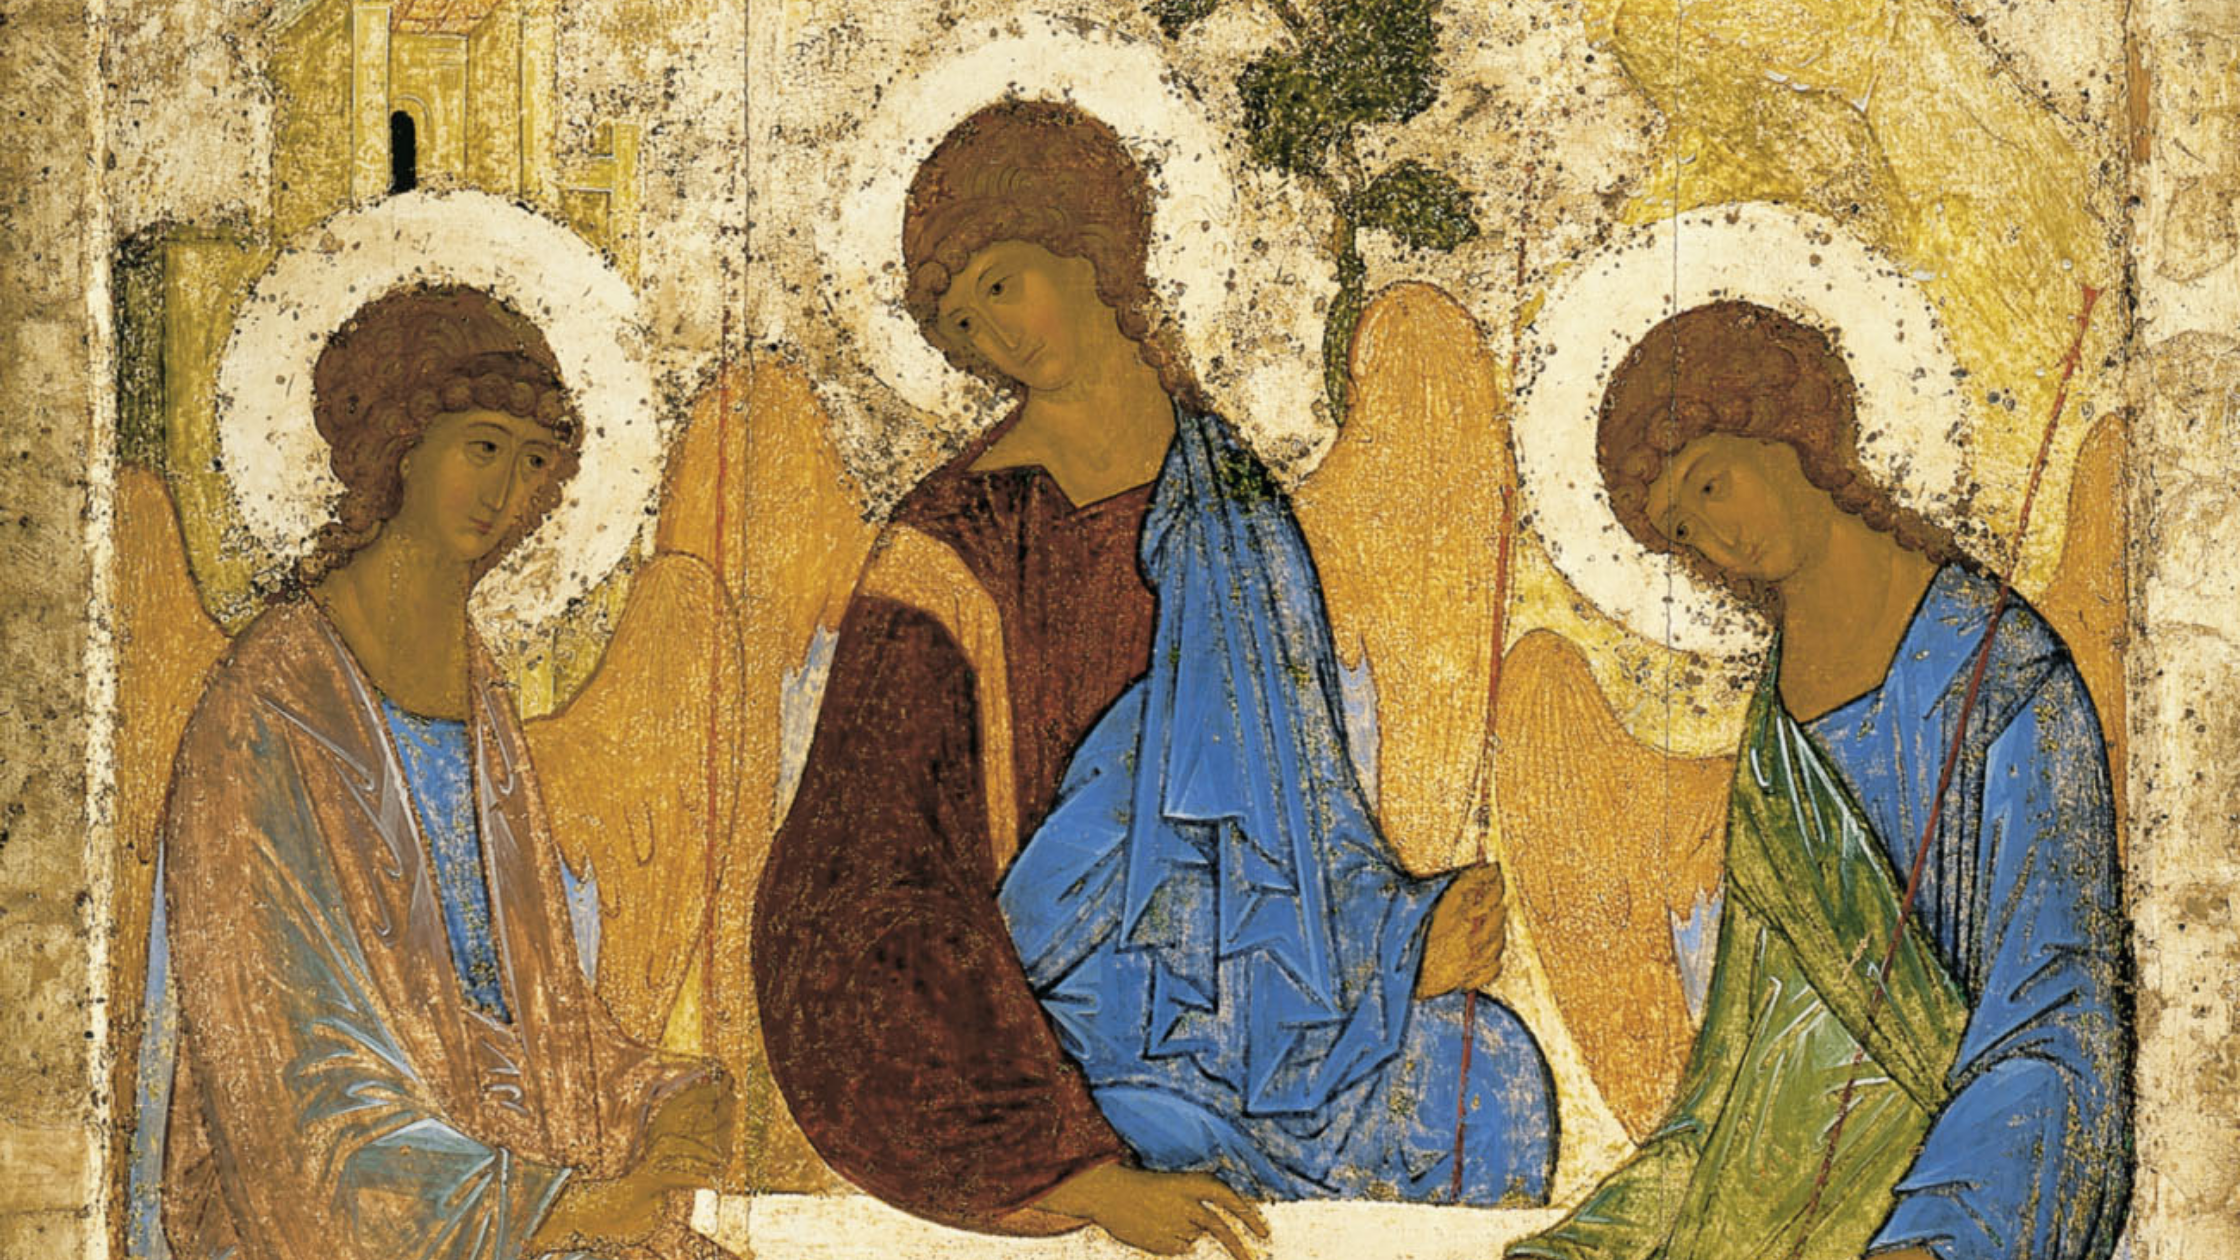 Rublev's famous icon showing the three Angels being hosted by Abraham at Mambré.